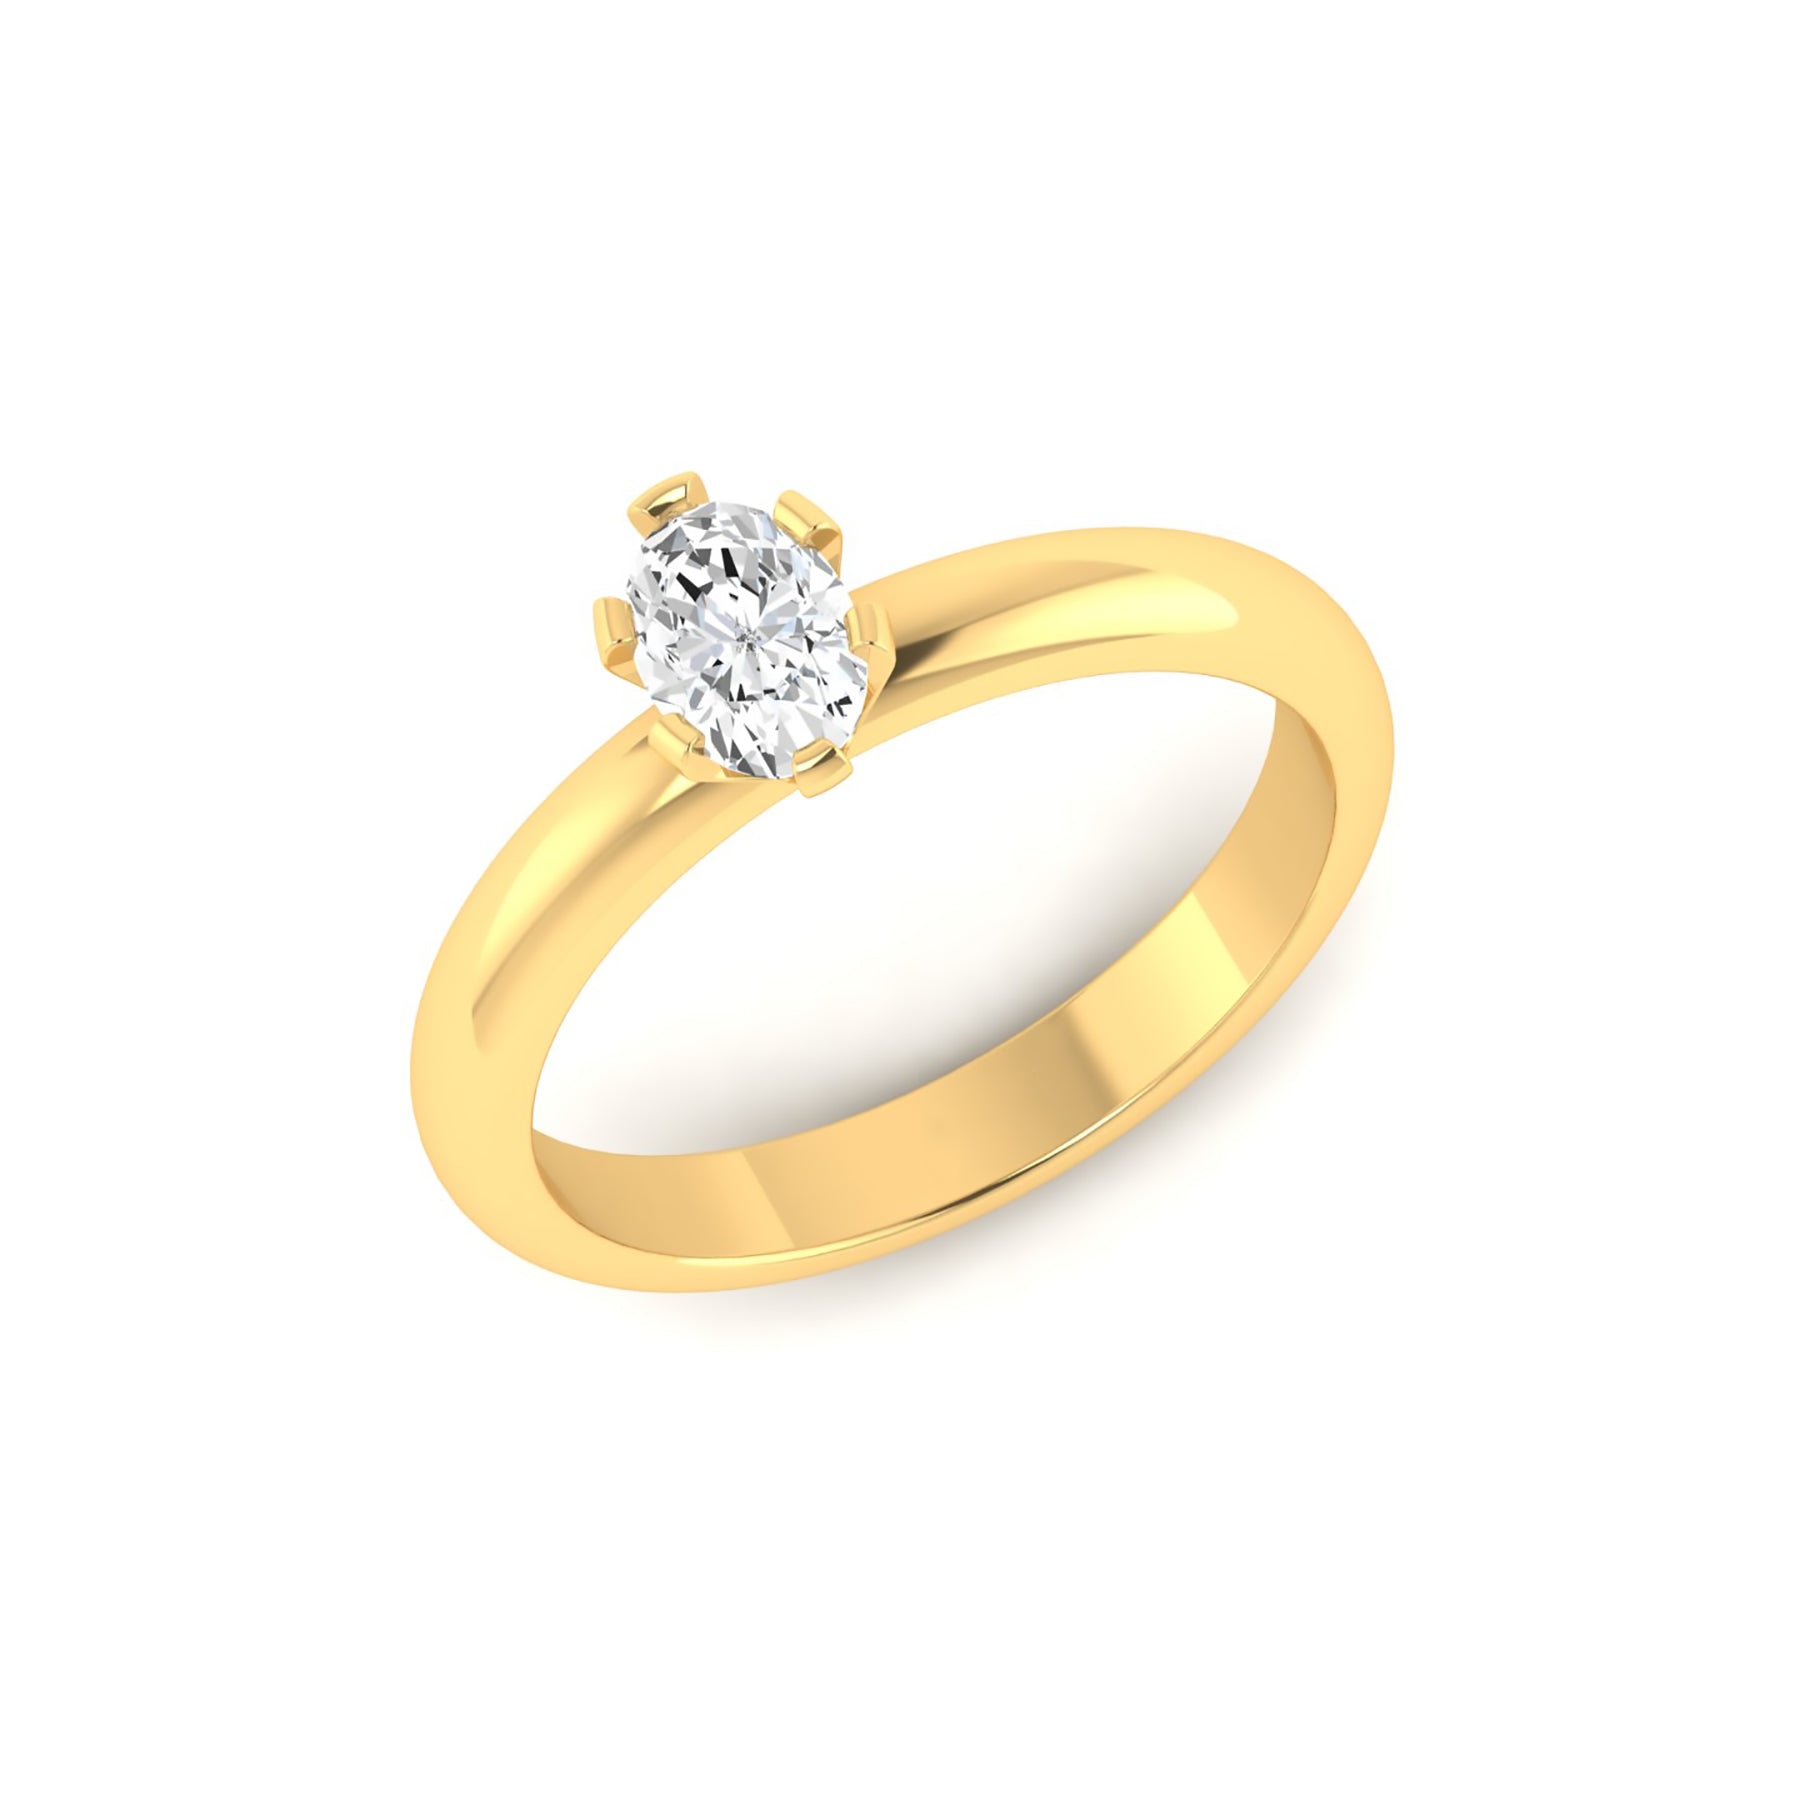 6-Prong Oval Solitaire Engagement Ring